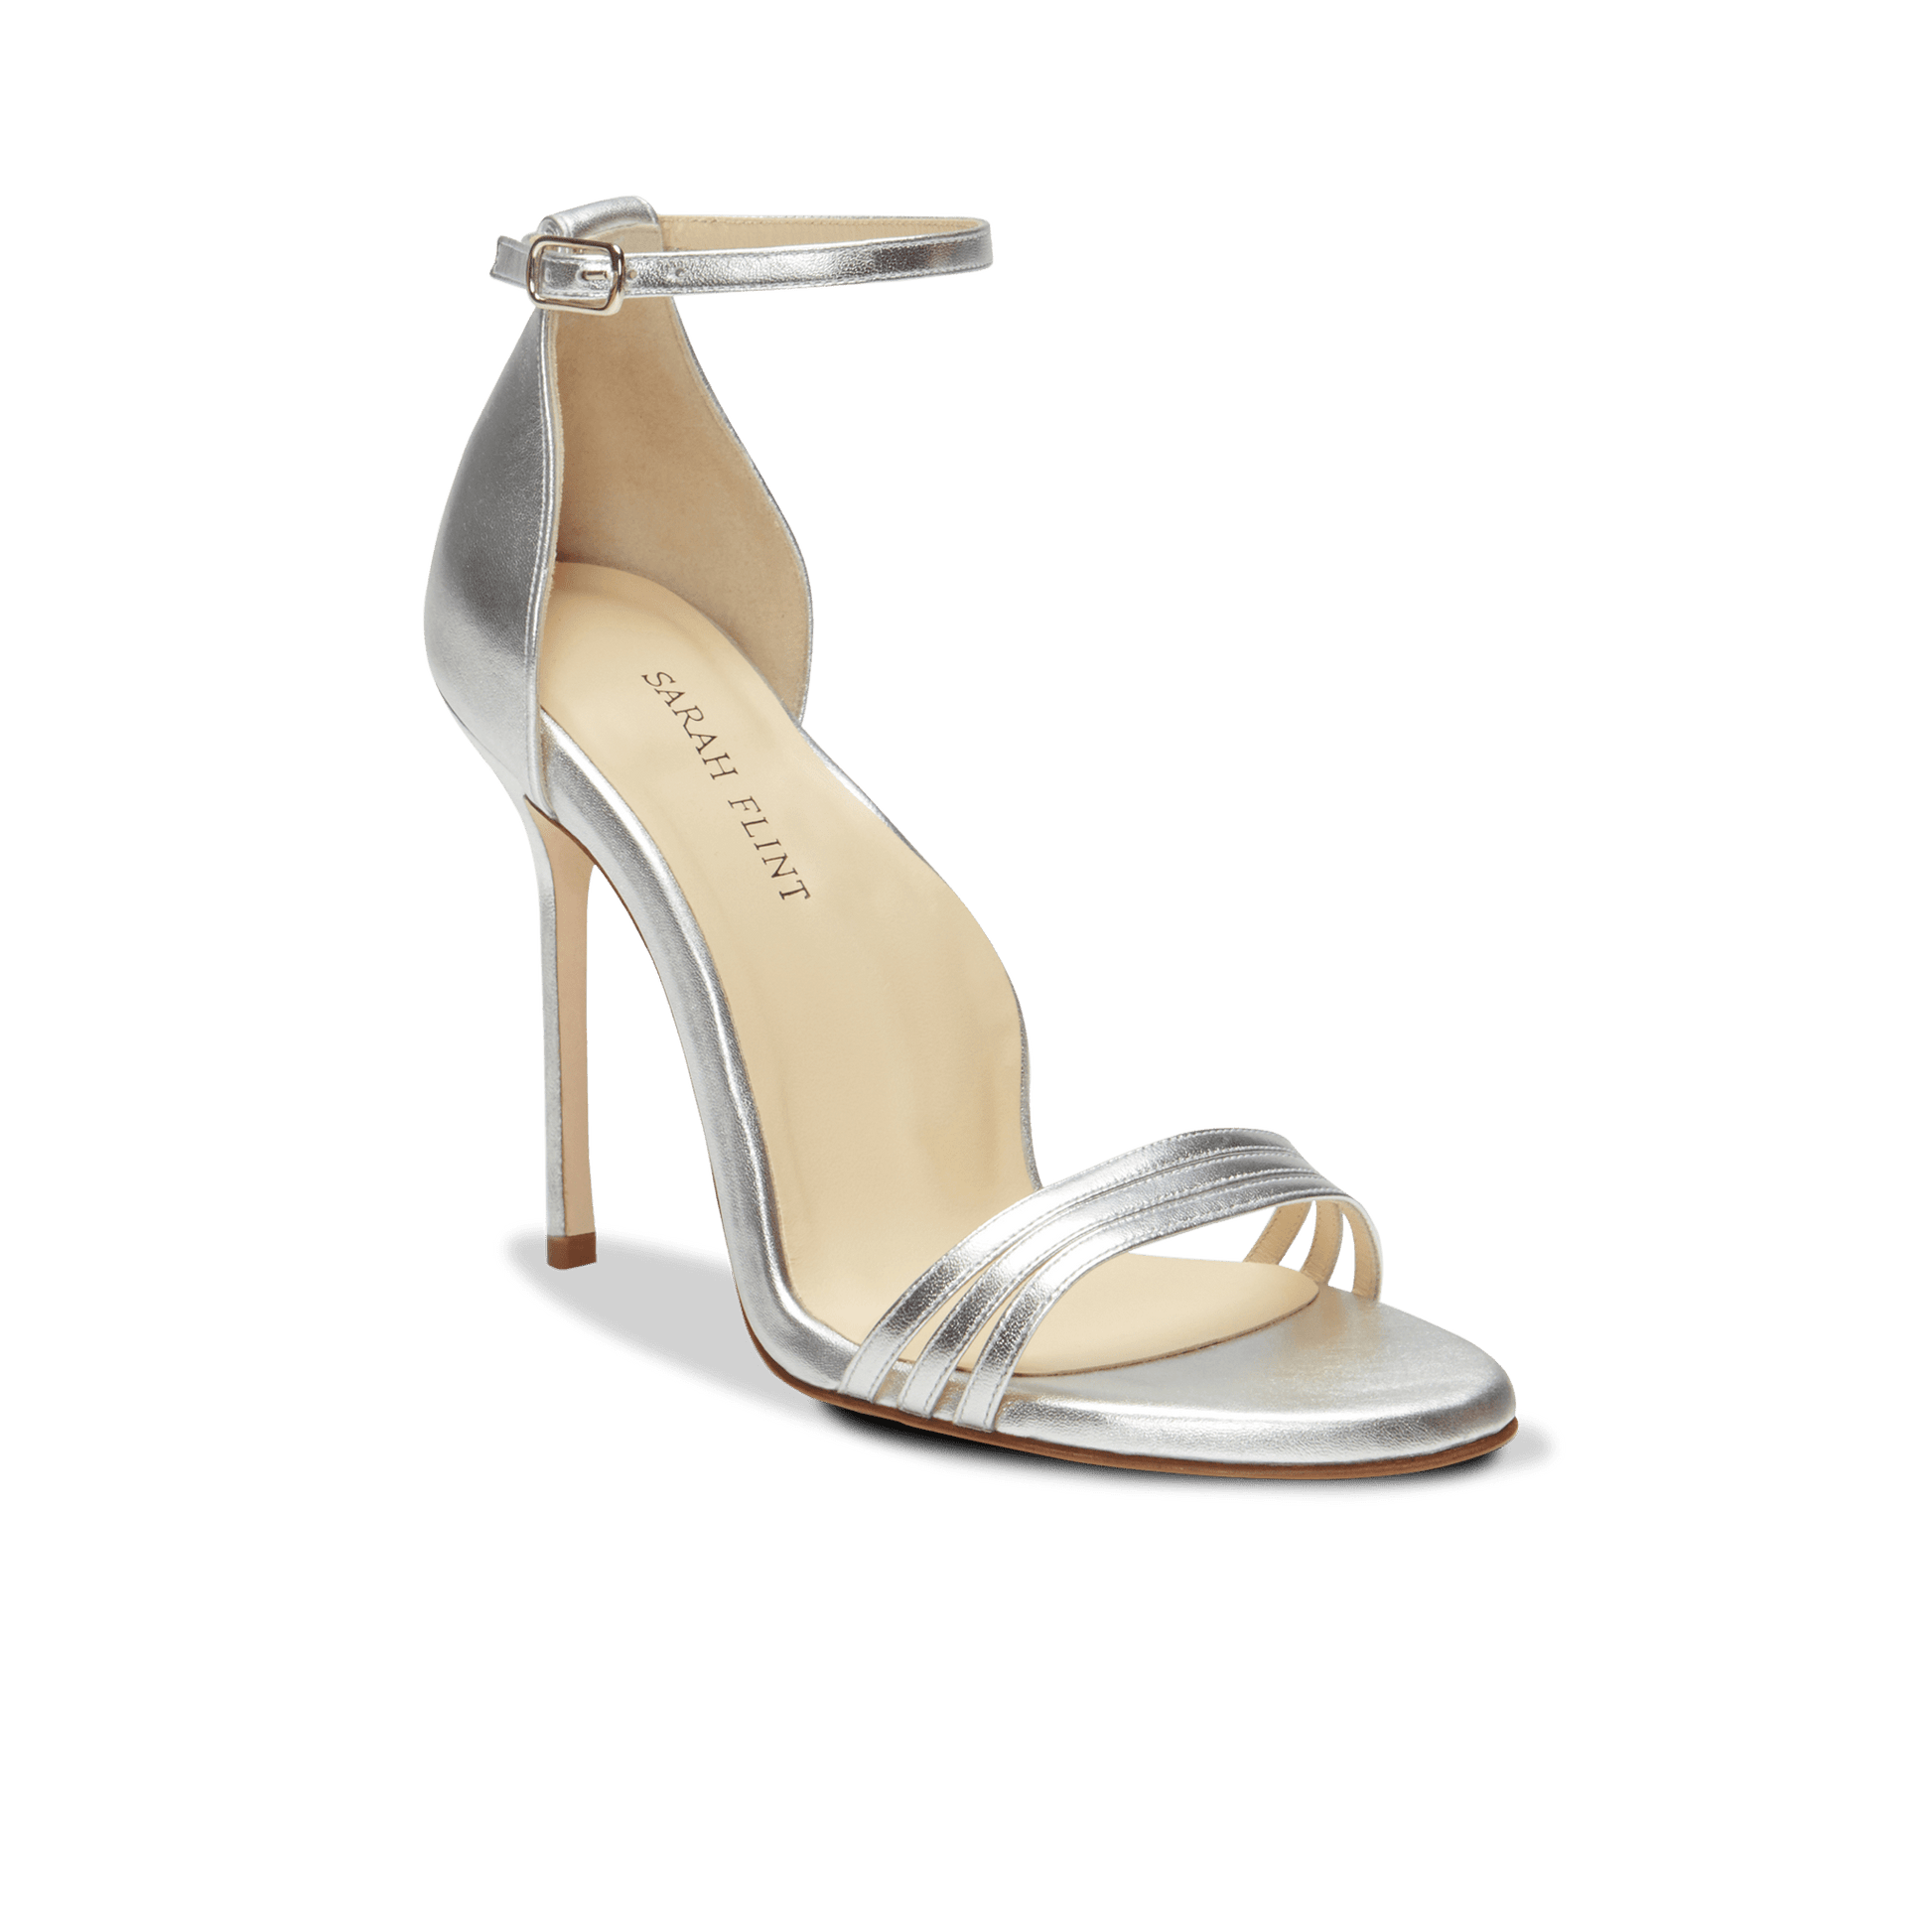 100mm Italian Made Round Toe Perfect Sandal in Silver Nappa